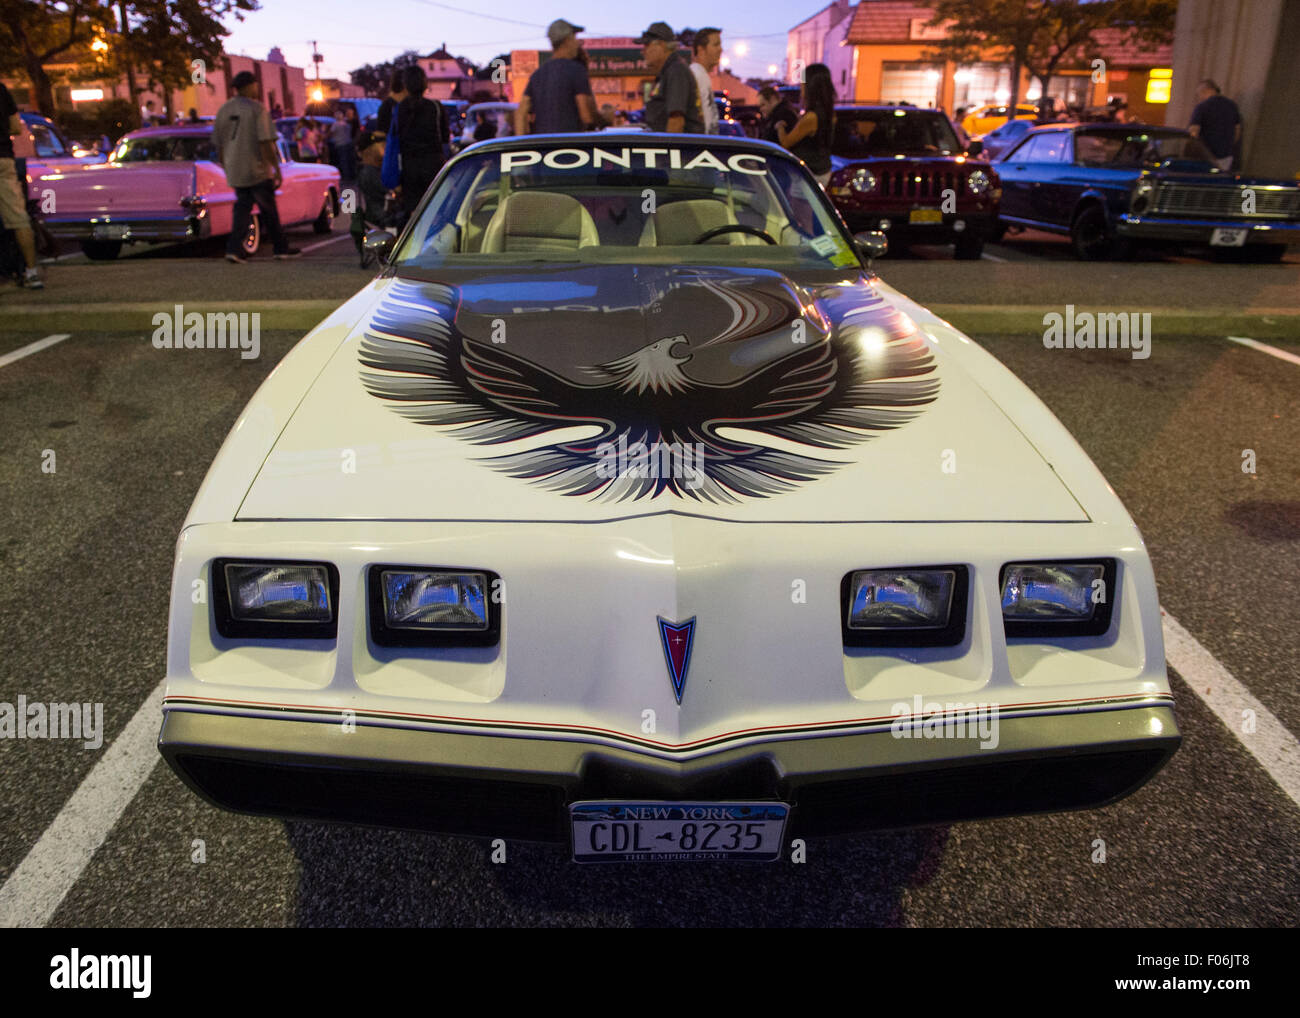 Bellmore, New York, USA. 7th August 2015. A white 1980 Pontiac Turbo-Trans Am, with large eagle decal sticker on hood, is displayed at the Friday Night Car Show held at the Bellmore Long Island Railroad Station Parking Lot. On side of car a decal states 'Official Pace Car, Torbo-Trans Am, 64th Annual Indianapolis 500 Mile Car Race on May 25, 1980.' Hundreds of classic, antique, and custom cars were on view at the free weekly show, sponsored by the Chamber of Commerce of the Bellmores. Stock Photo